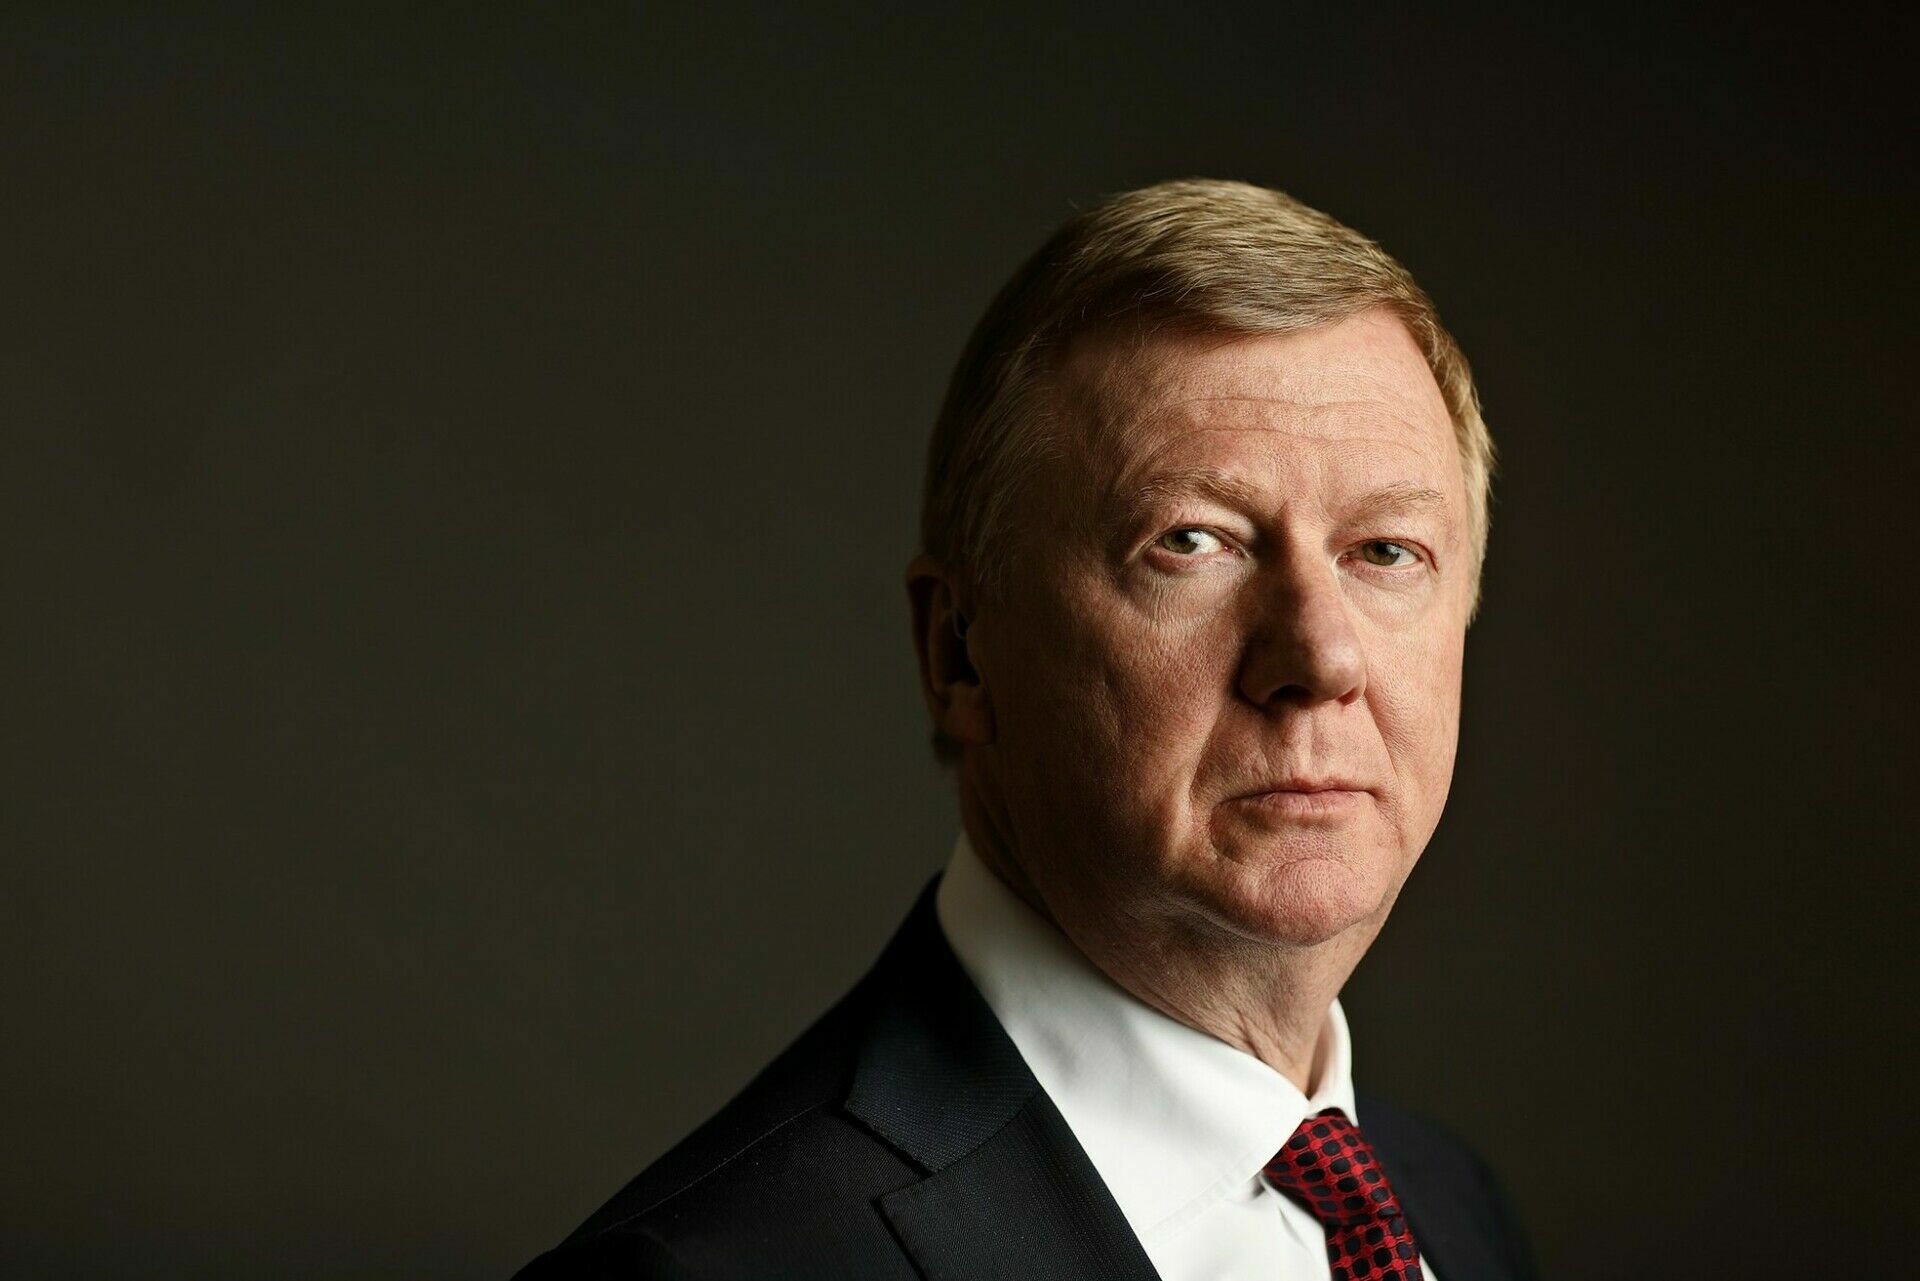 TASS: Anatoly Chubais moved to Italy and does not intend to return to Russia